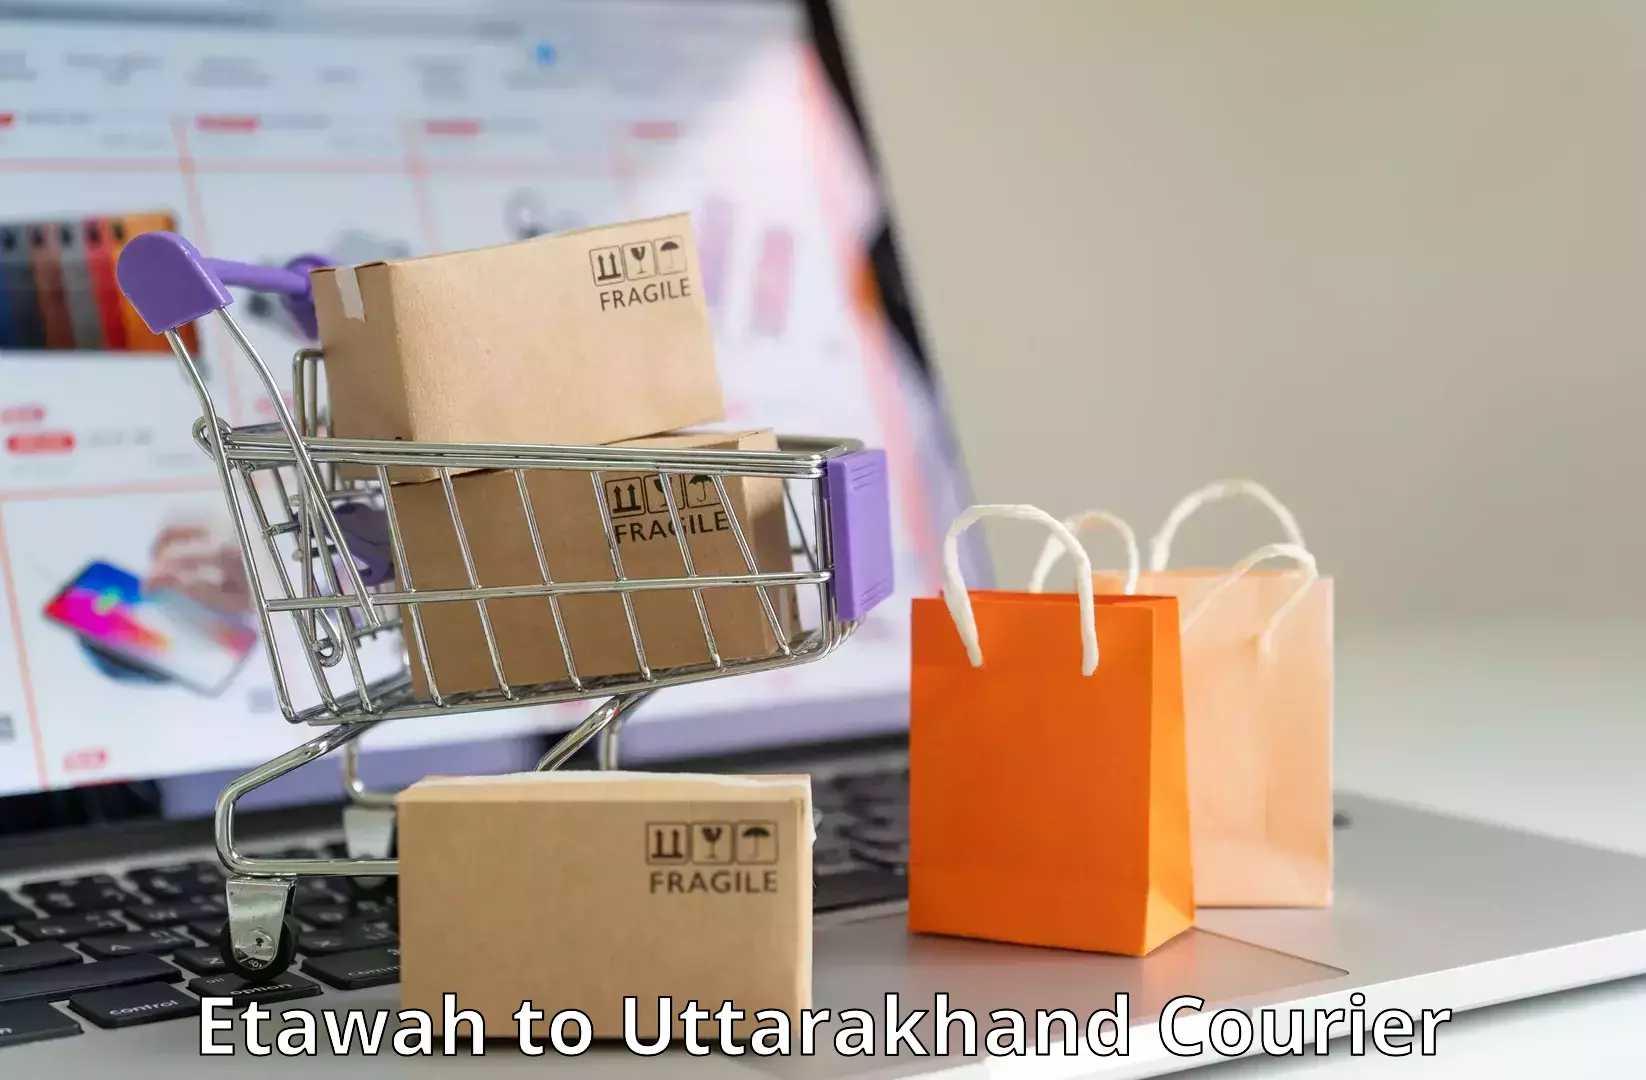 On-call courier service Etawah to Champawat